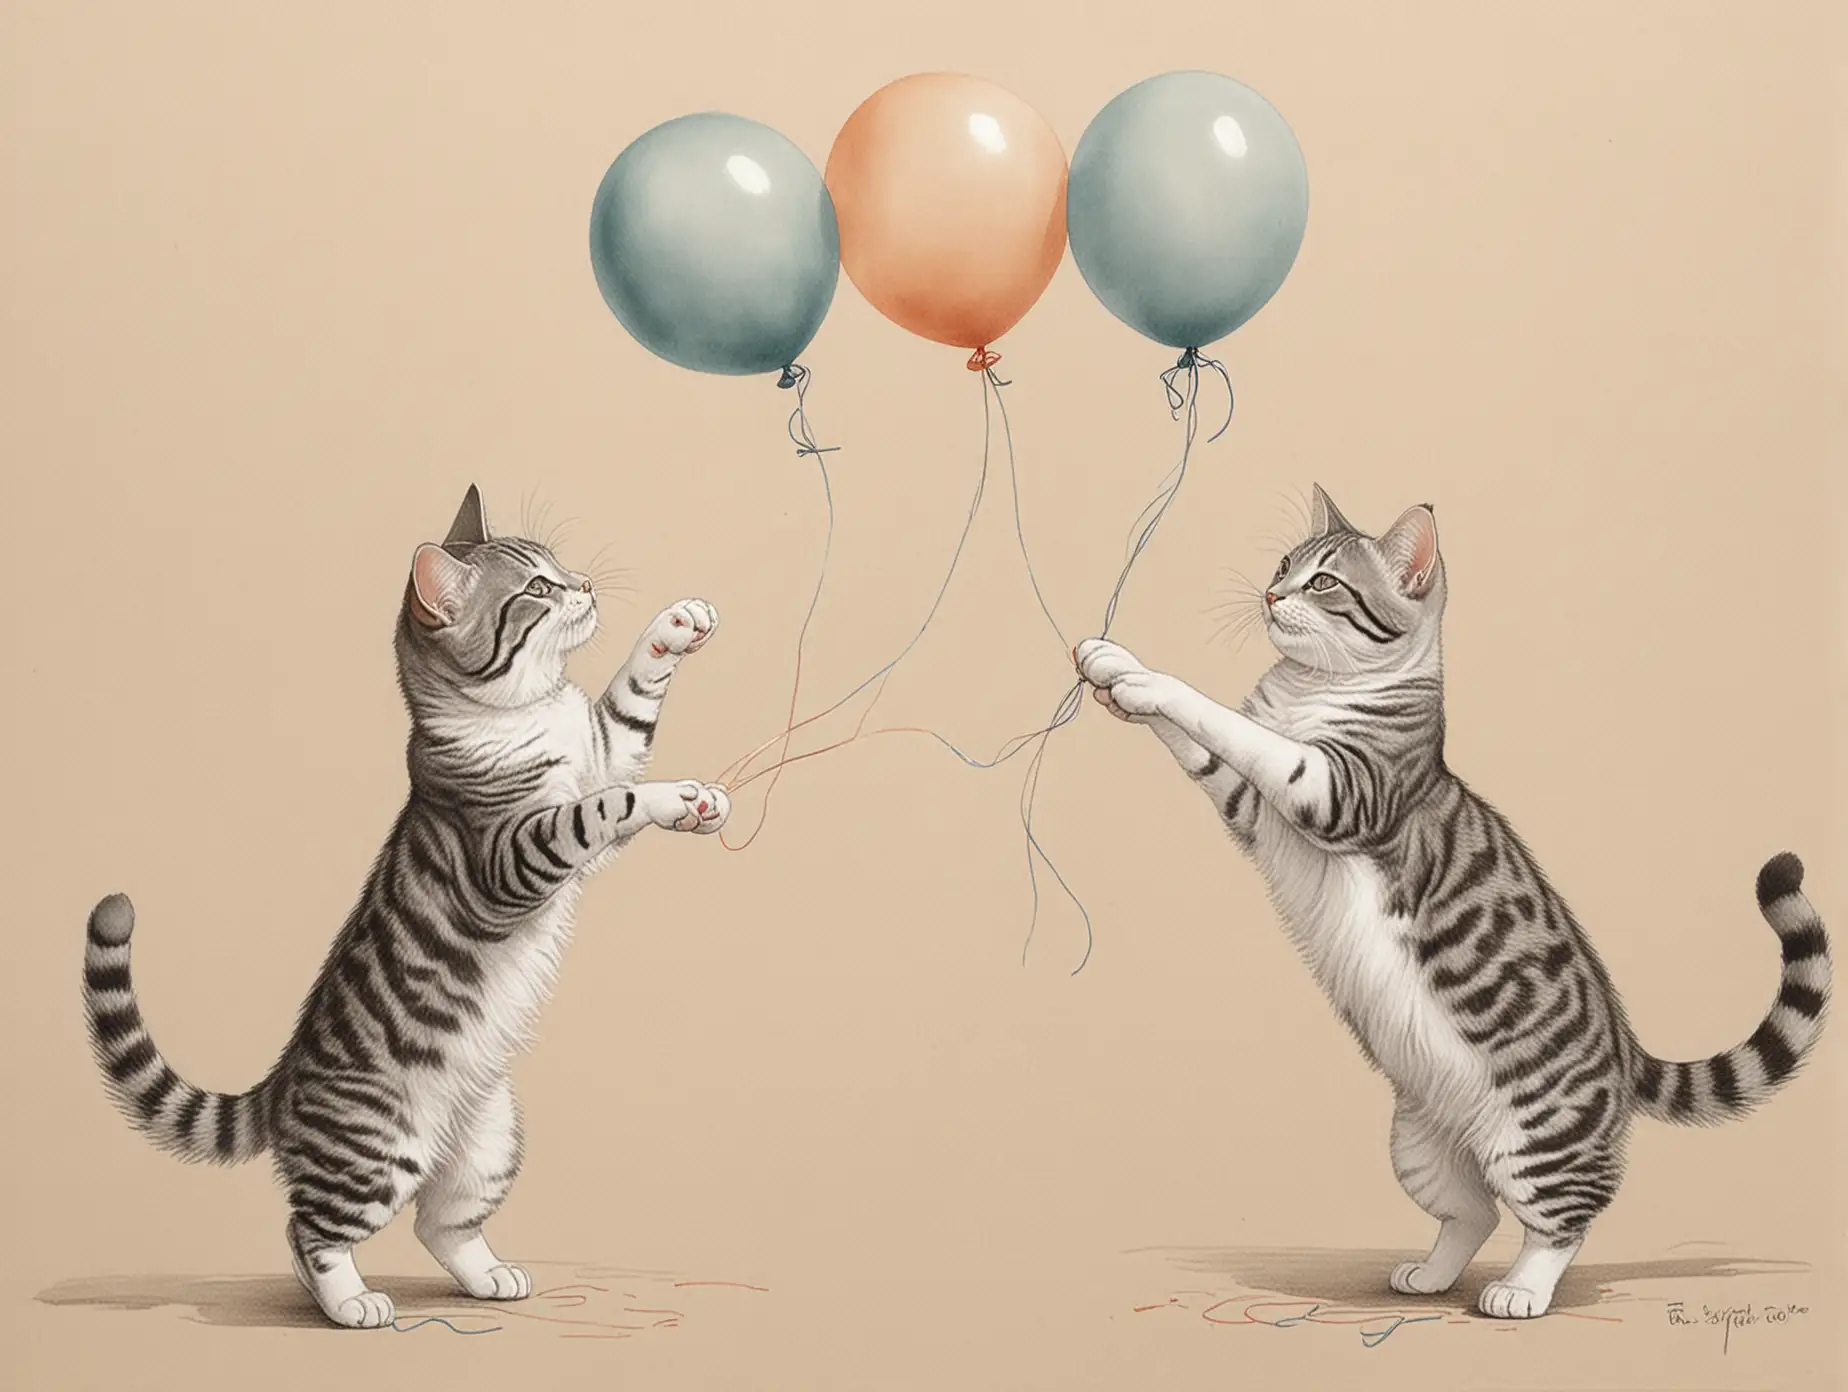 In the style of beatrice potter, drawing of  two gray and white tabby cats playing with balloons